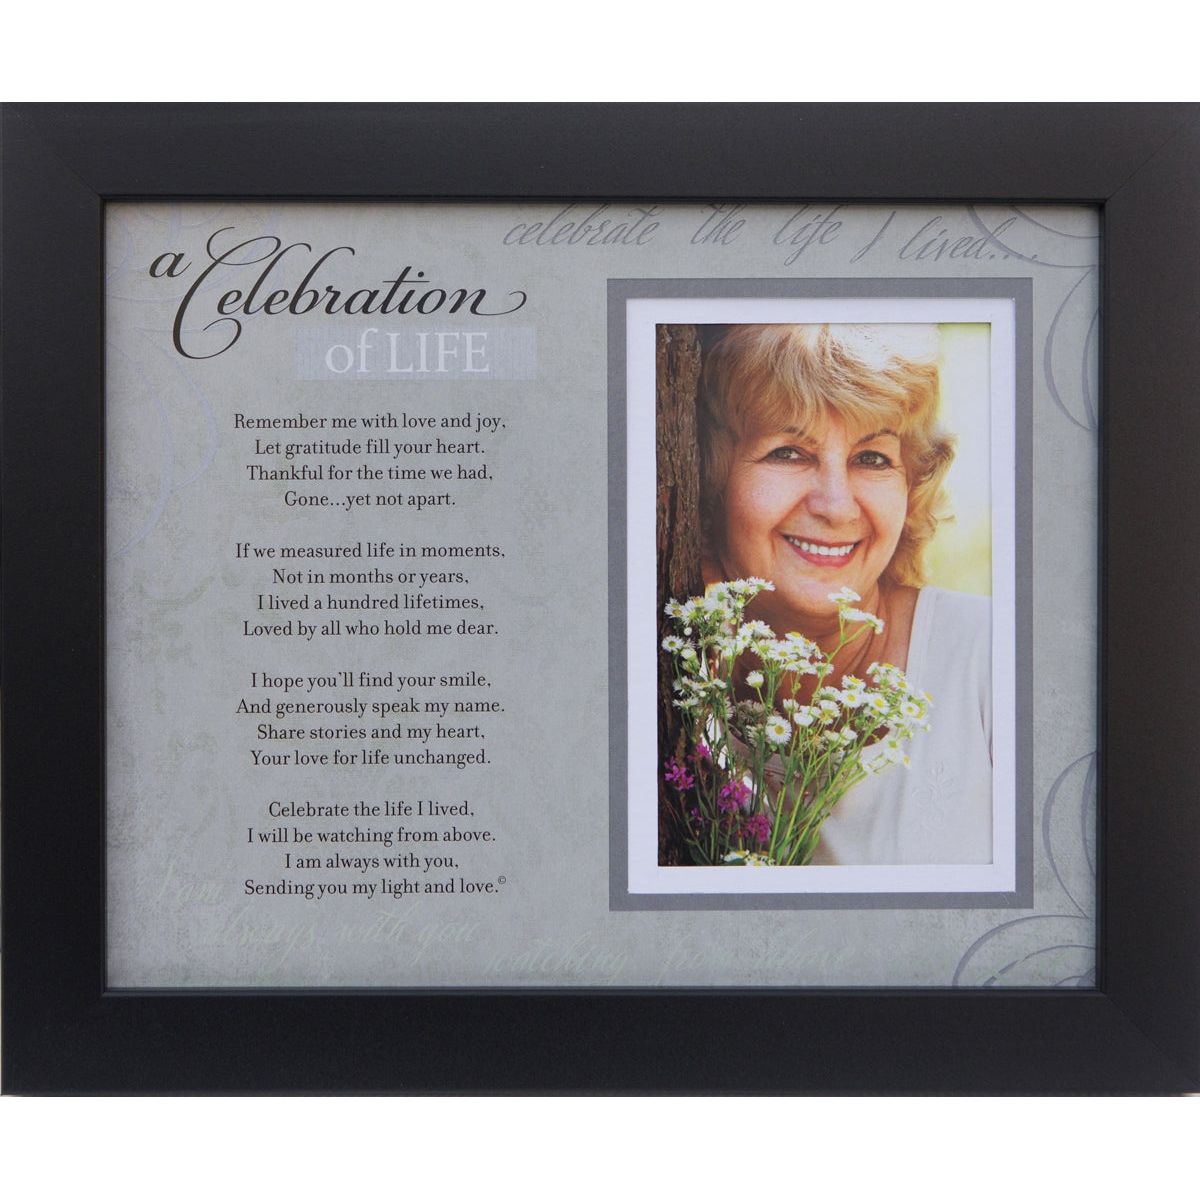 8x10 black frame with &quot;Celebration of Life Memorial&quot; poem and opening for 3.5&quot;x5&quot; or 4&quot;x6&quot; photo.